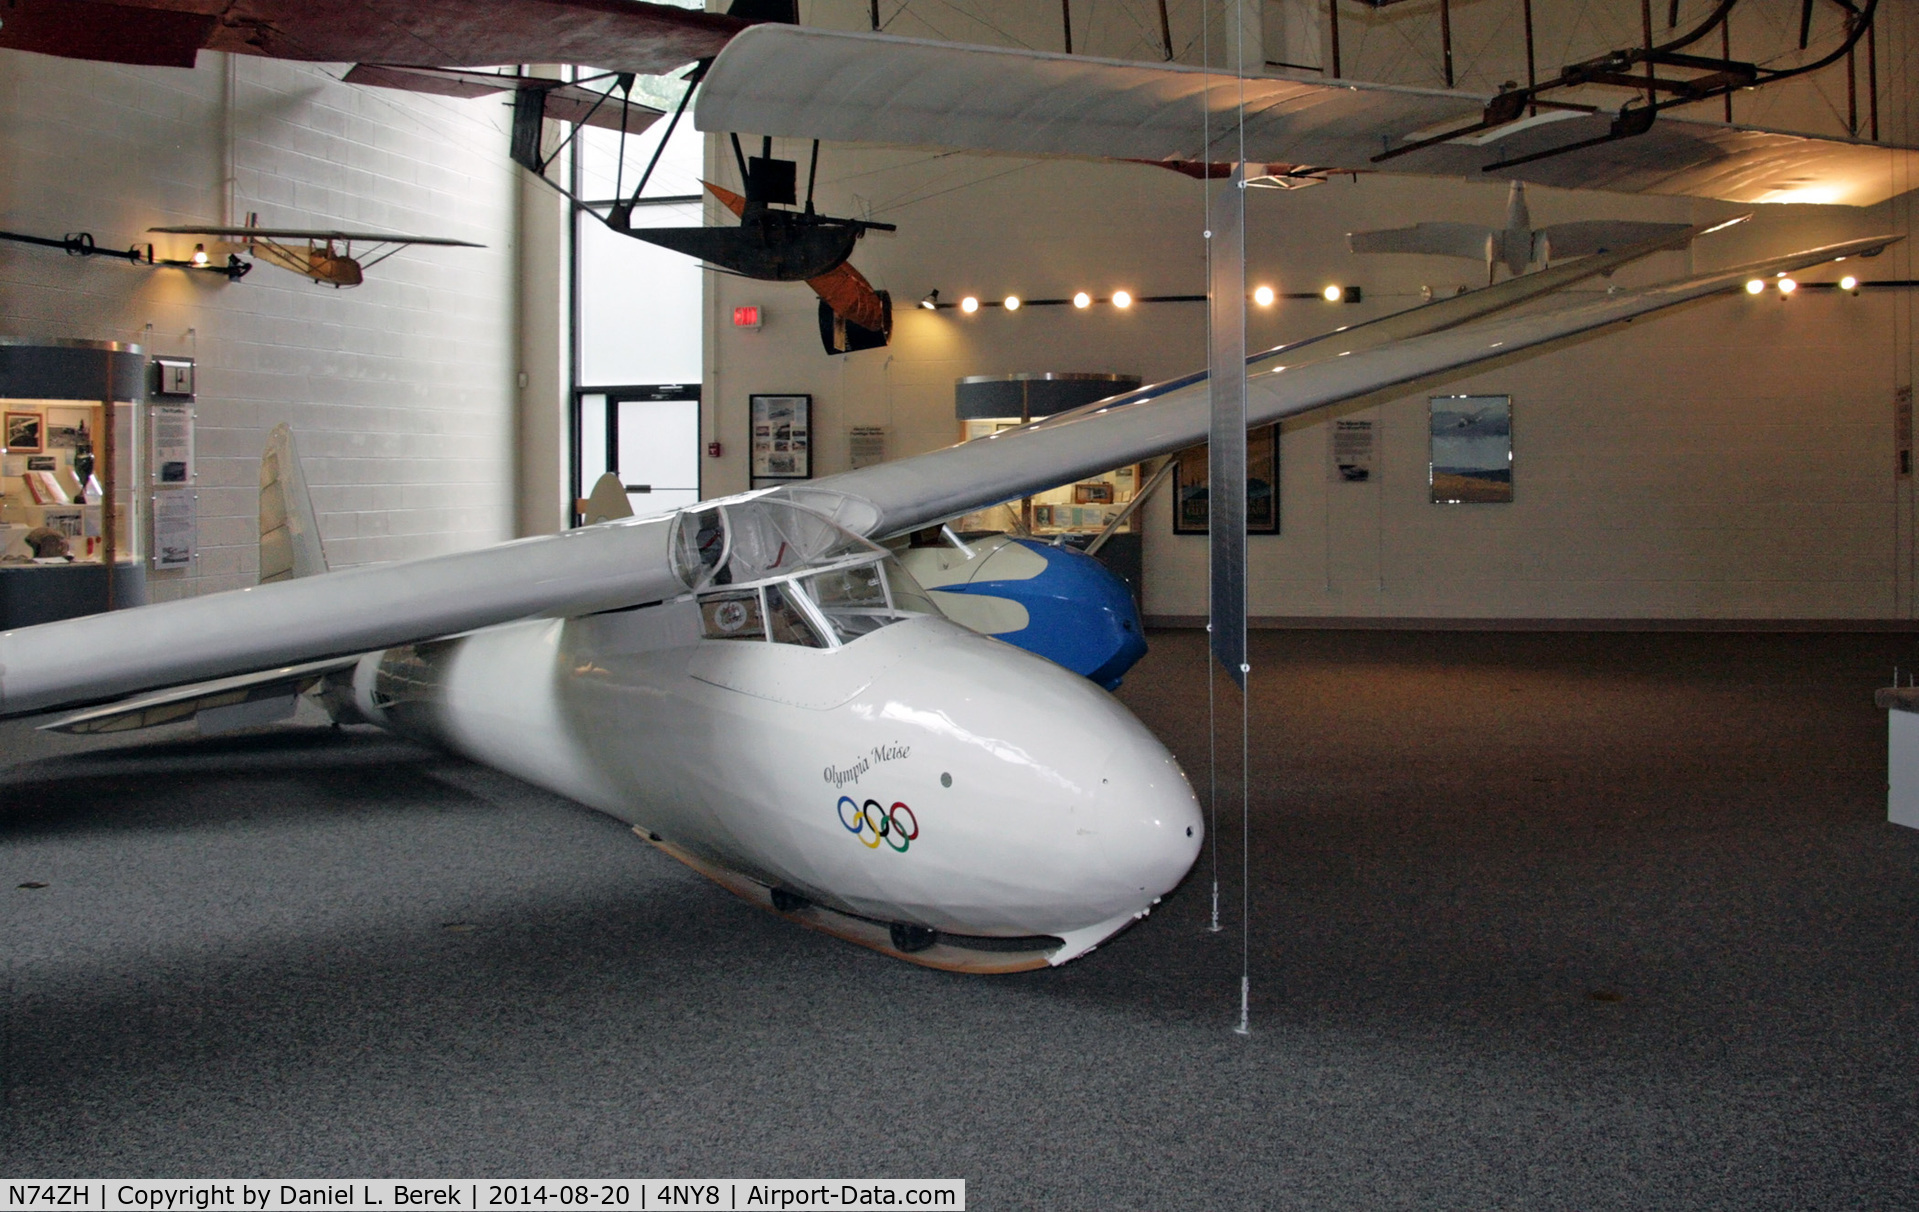 N74ZH, 1947 Nord 2000 C/N 051, This elegant glider is on display at the National Soaring Museum.